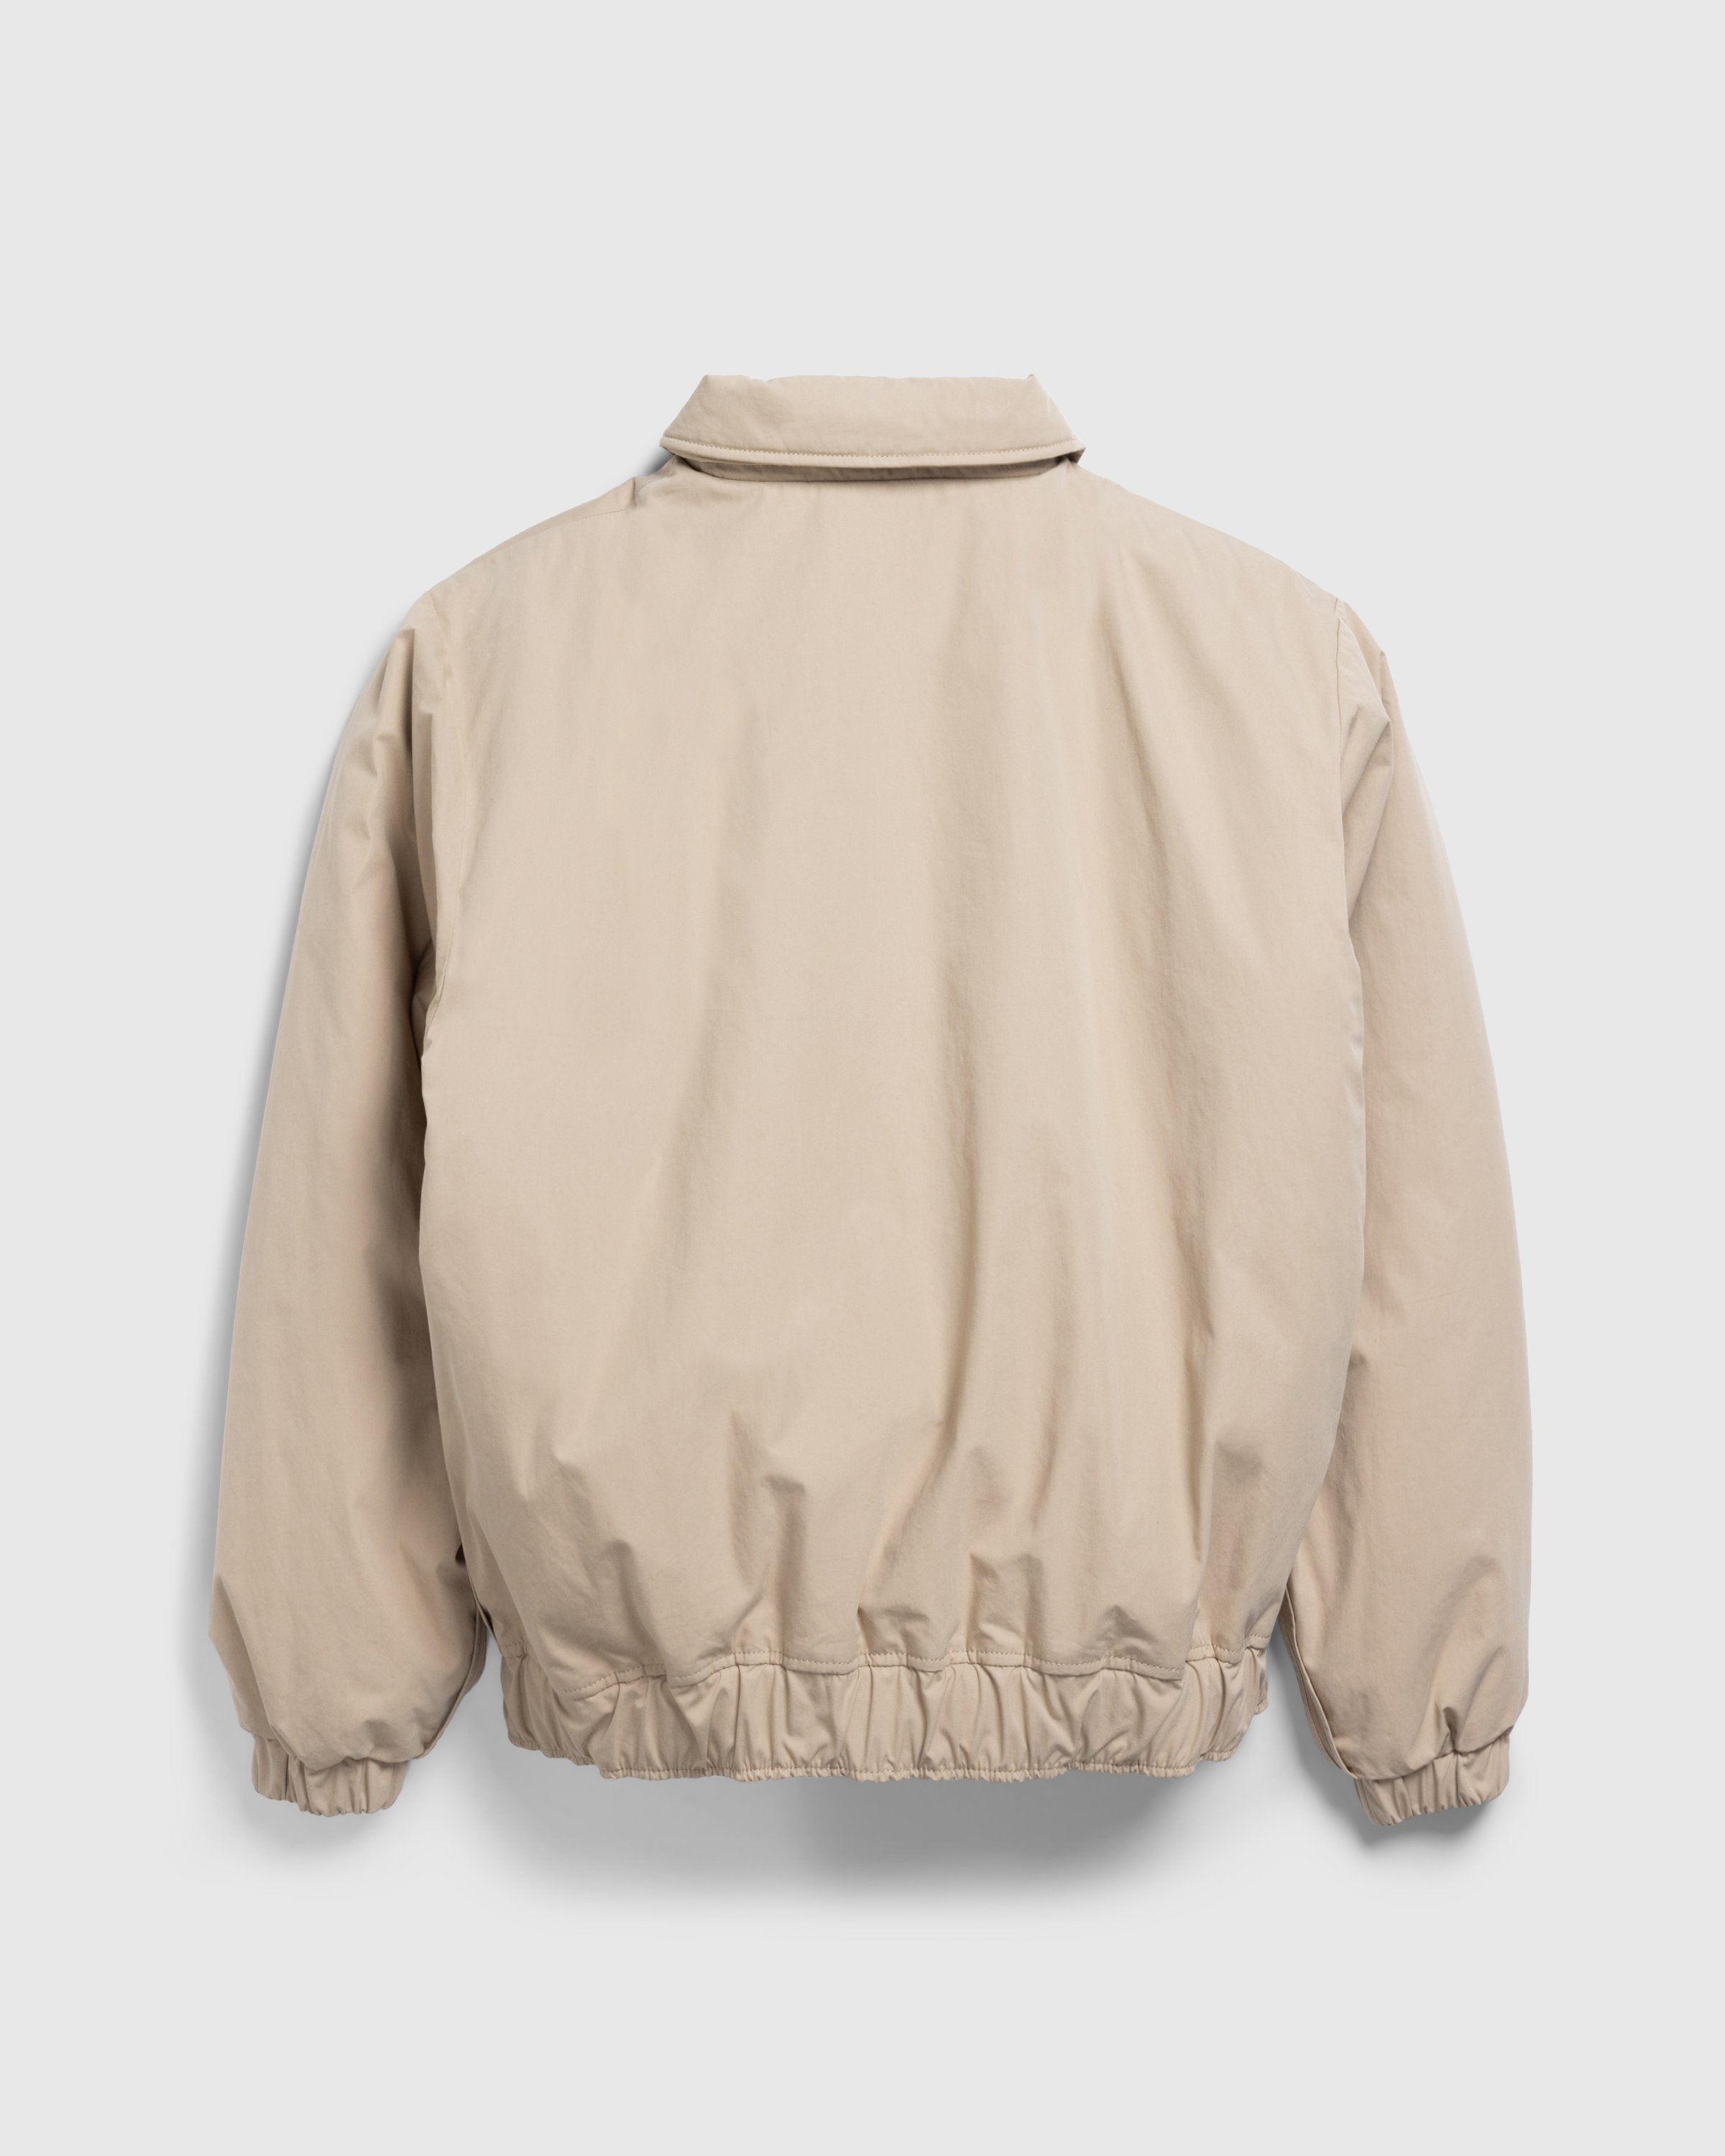 Highsnobiety HS05 - Reverse Piping Insulated Bomber - Clothing - Beige - Image 2